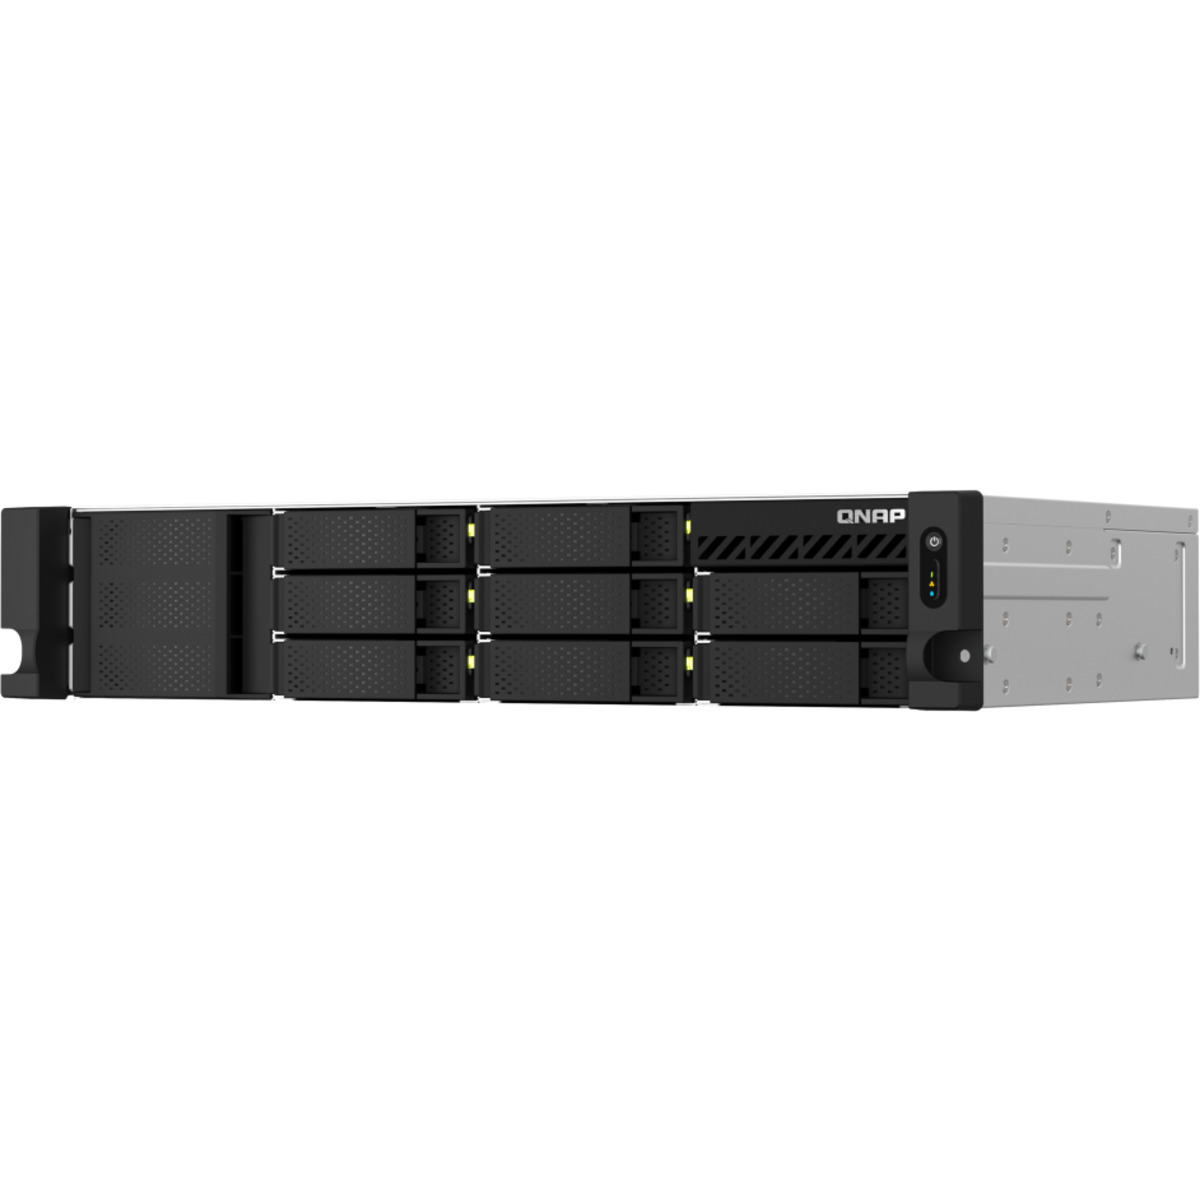 QNAP TS-864eU-RP 72tb 8-Bay RackMount Multimedia / Power User / Business NAS - Network Attached Storage Device 6x12tb Western Digital Red Pro WD121KFBX 3.5 7200rpm SATA 6Gb/s HDD NAS Class Drives Installed - Burn-In Tested TS-864eU-RP